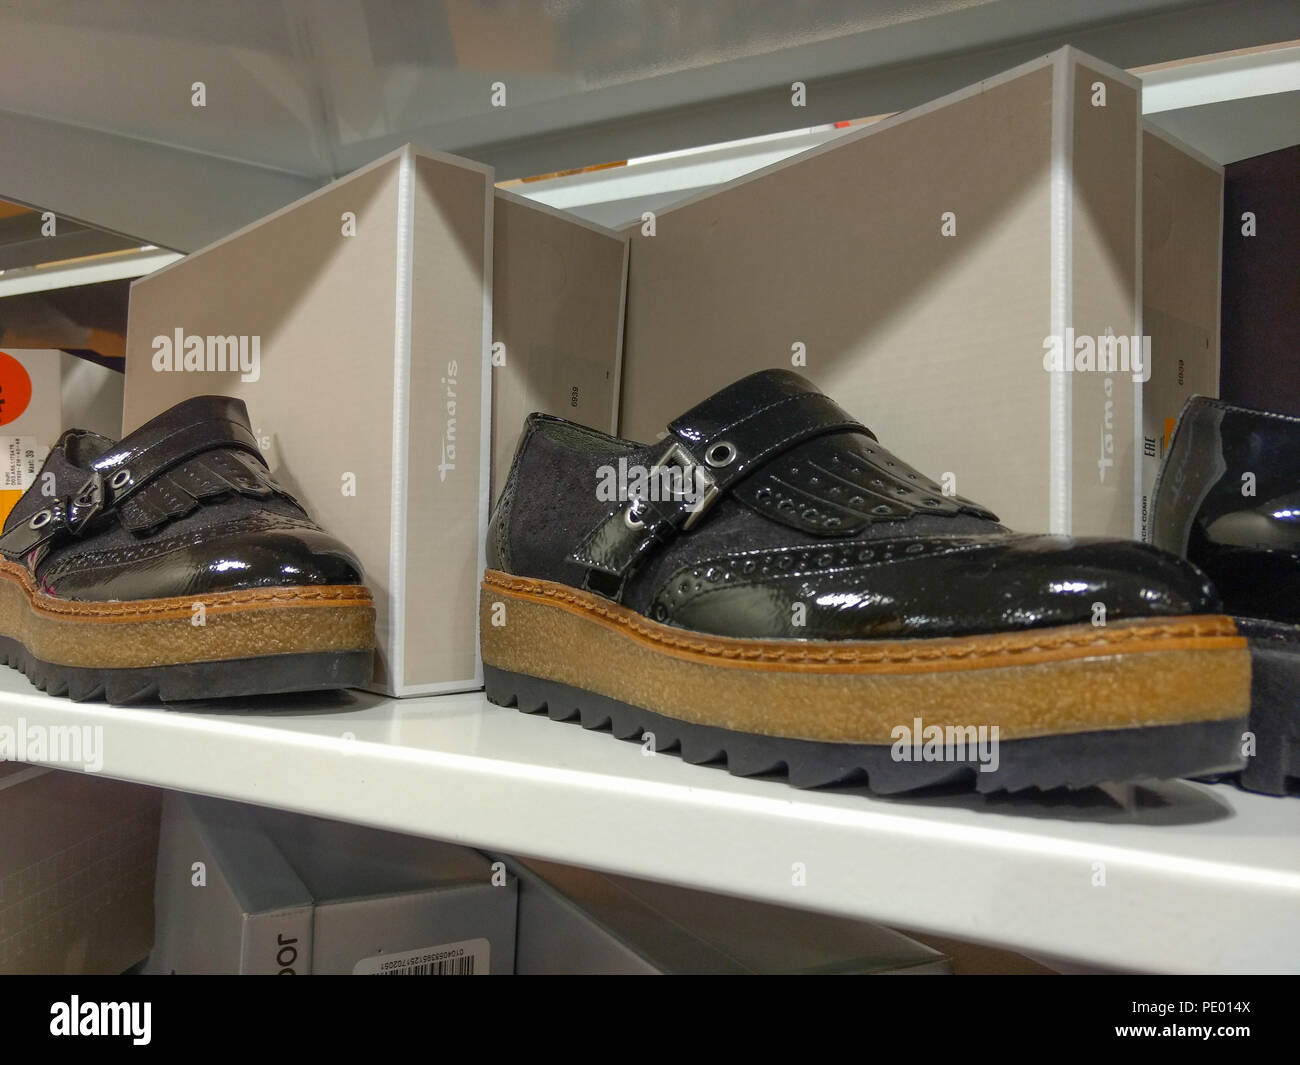 Shoes of the brand Tamaris displayed on shelf in shoe store Stock Photo -  Alamy